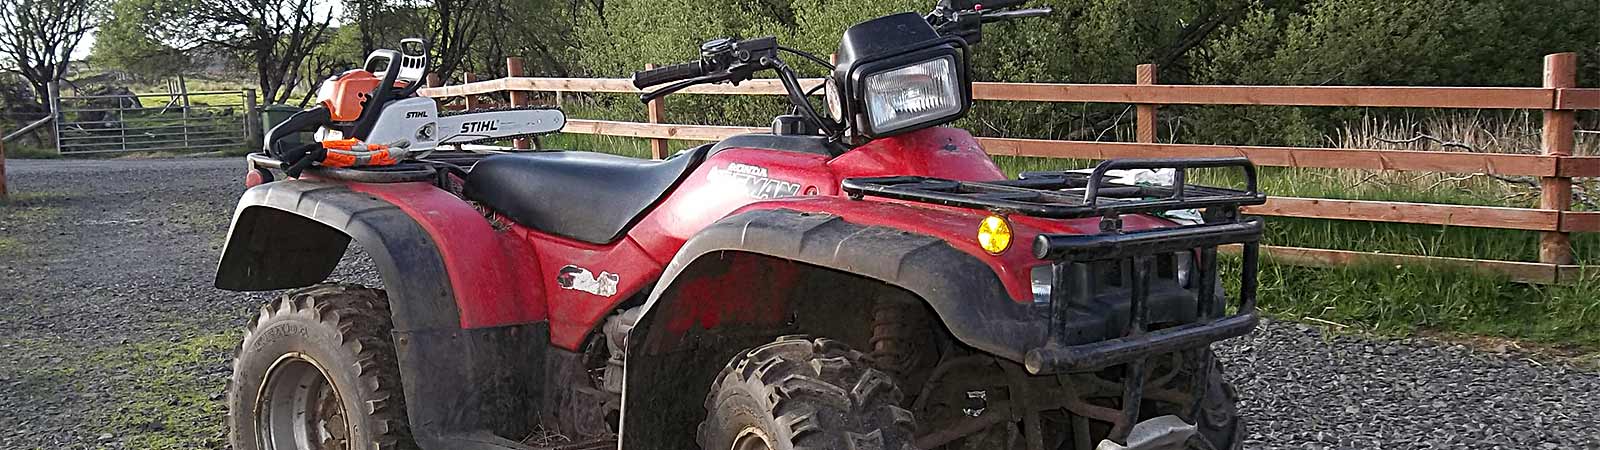 ATV and agricultural machinery repairs